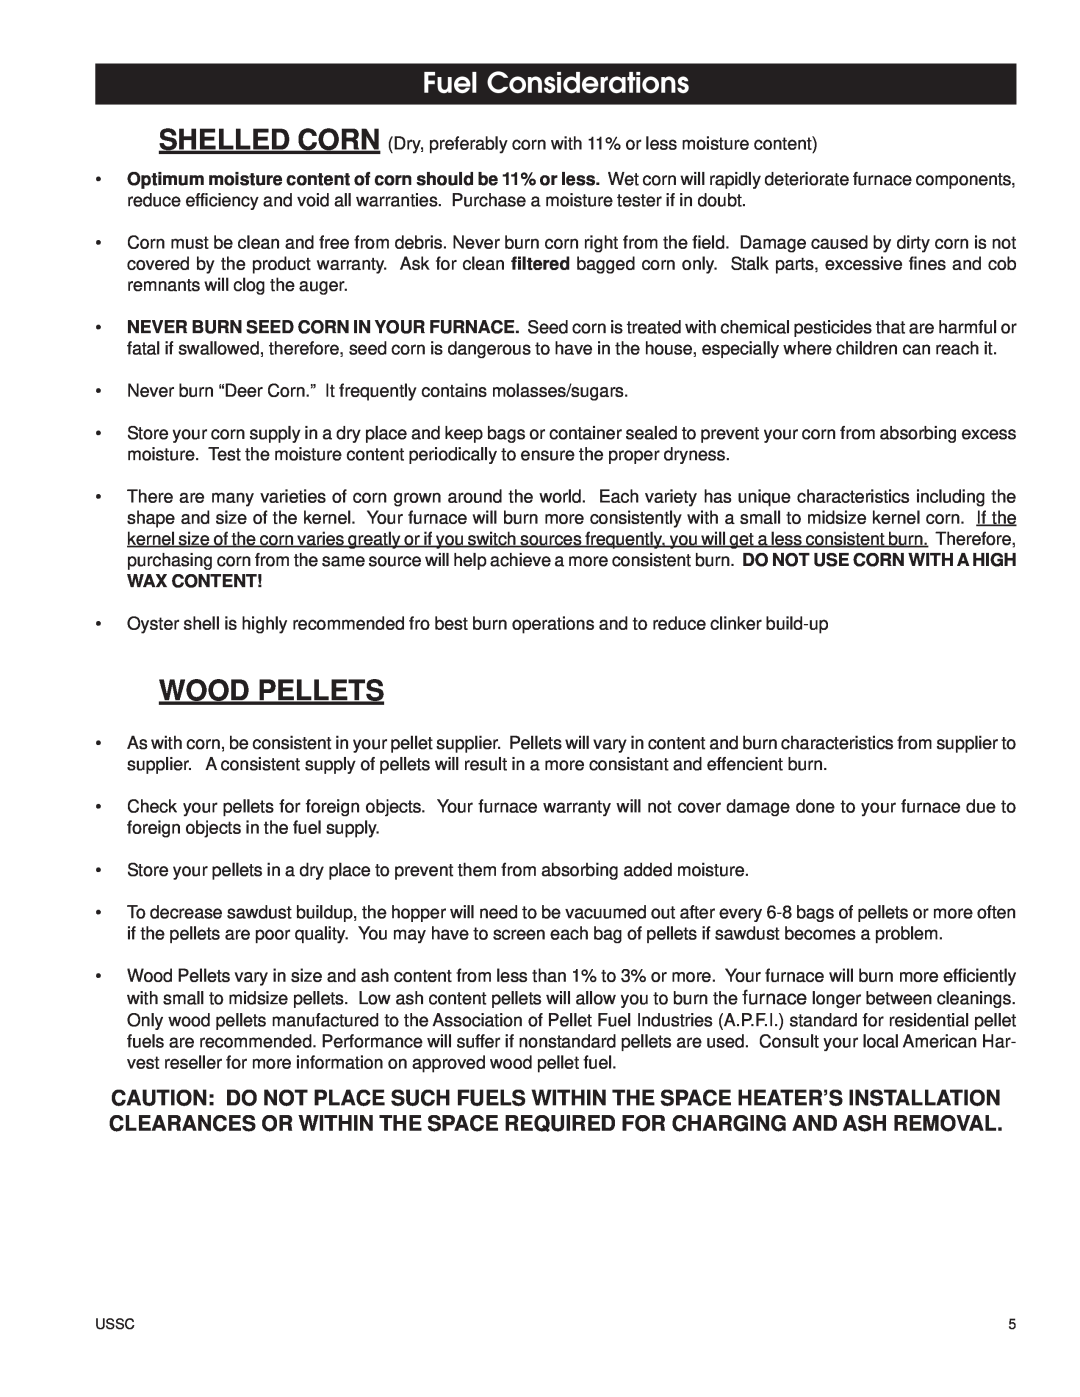 United States Stove 6100 owner manual Fuel Considerations, Wood Pellets 